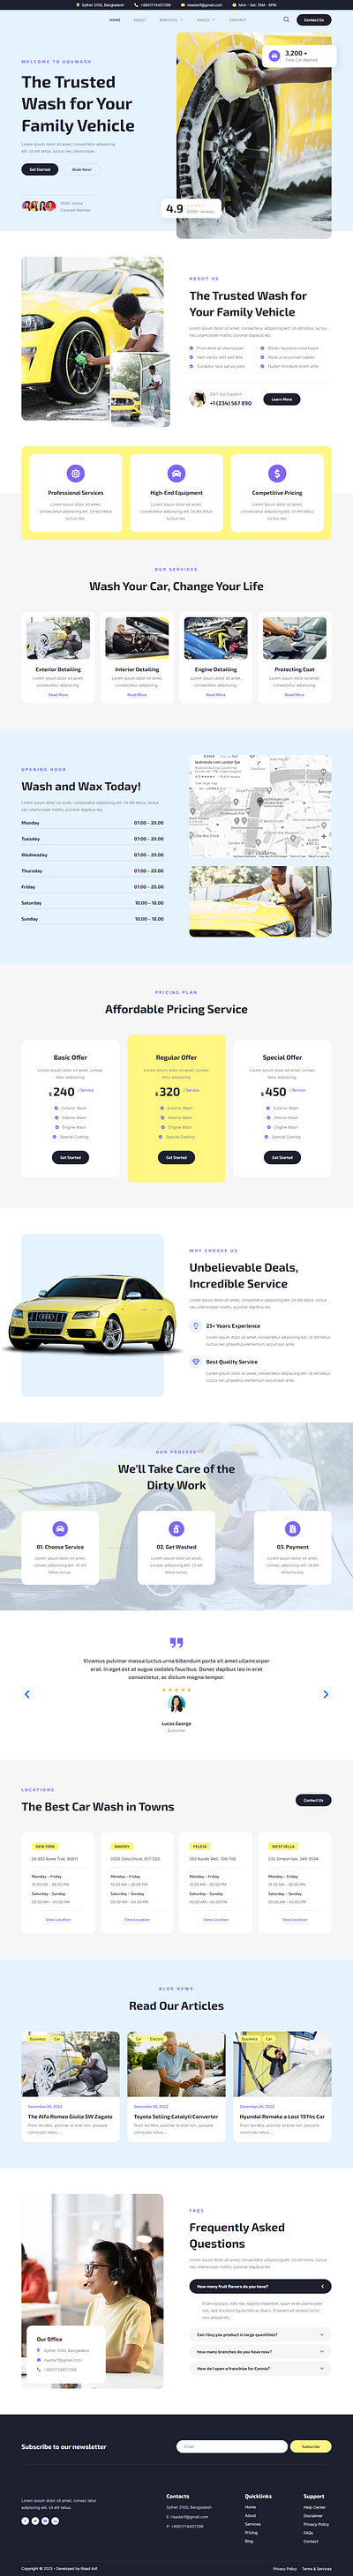 Car Wash and Detailing Service Website agency landing agency website business website car website design elementor landing elementor pro elementor website landing page page design ui washing website web design web designer web expert website design wordpress wordpress elementor wordpress landing wordpress website